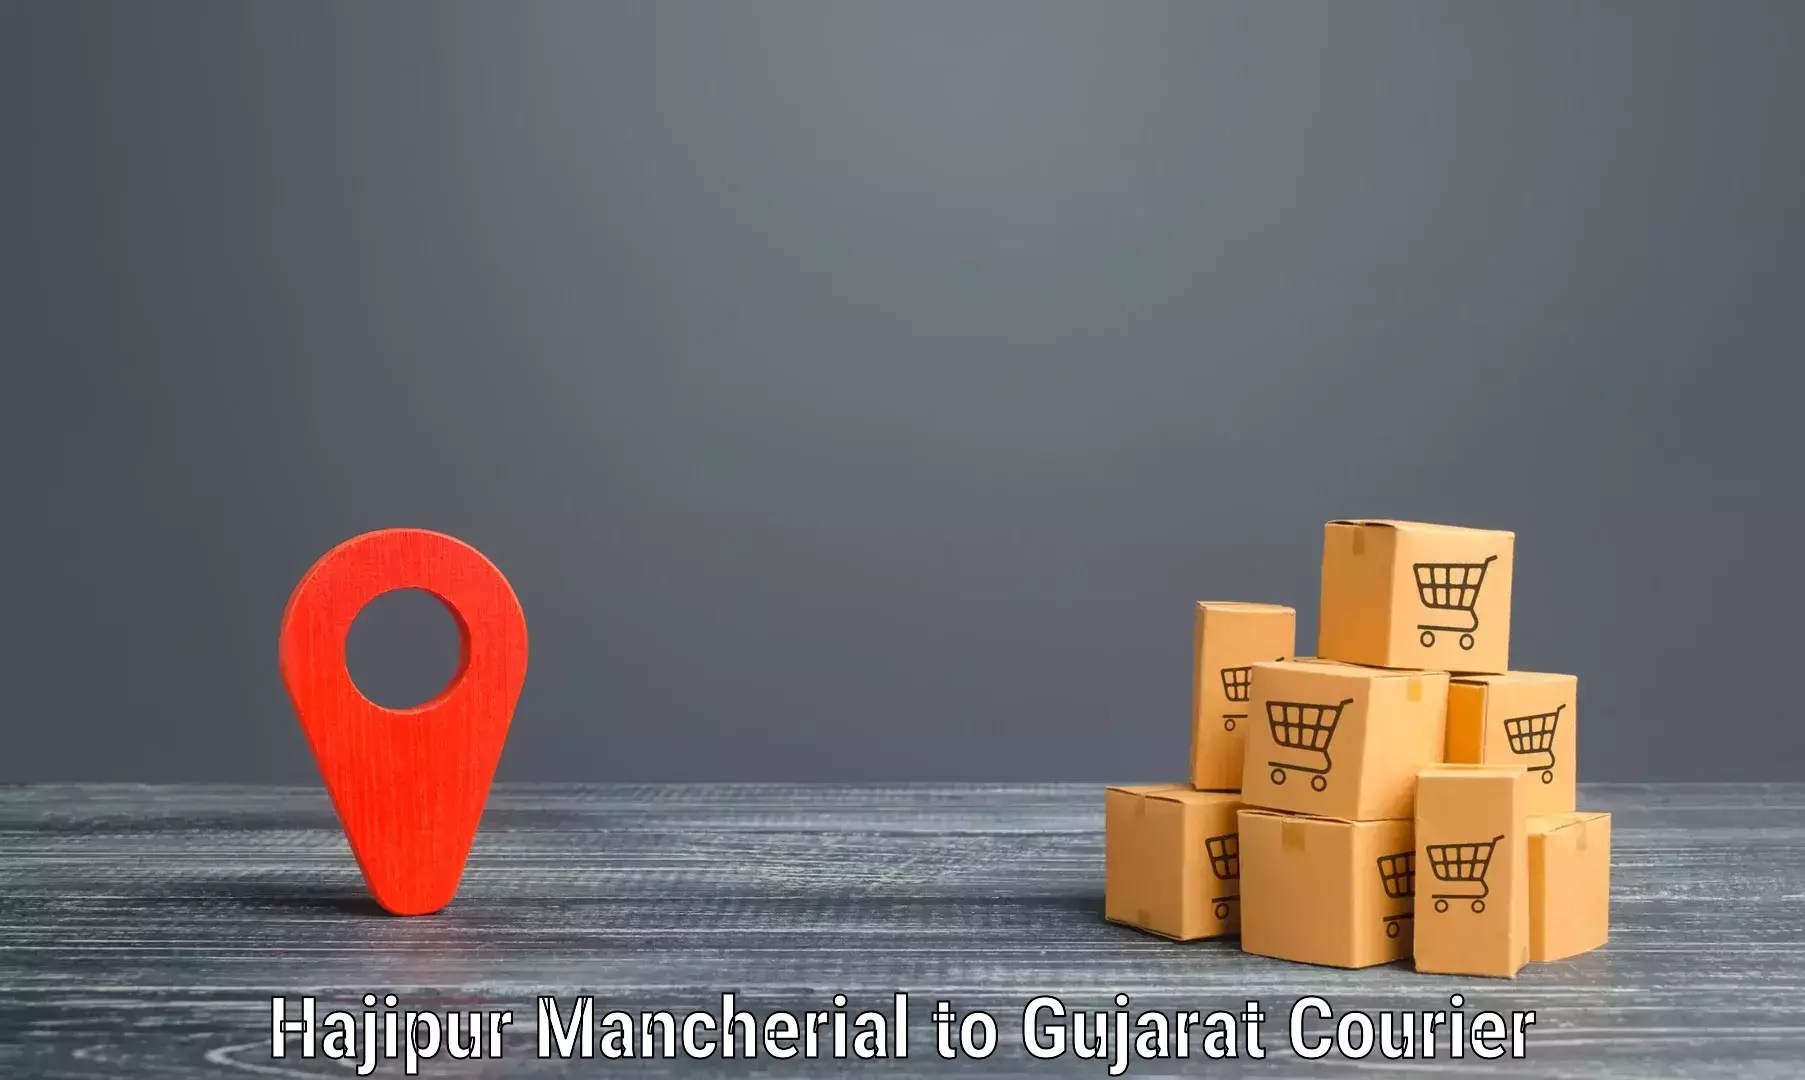 Easy access courier services in Hajipur Mancherial to Shihori